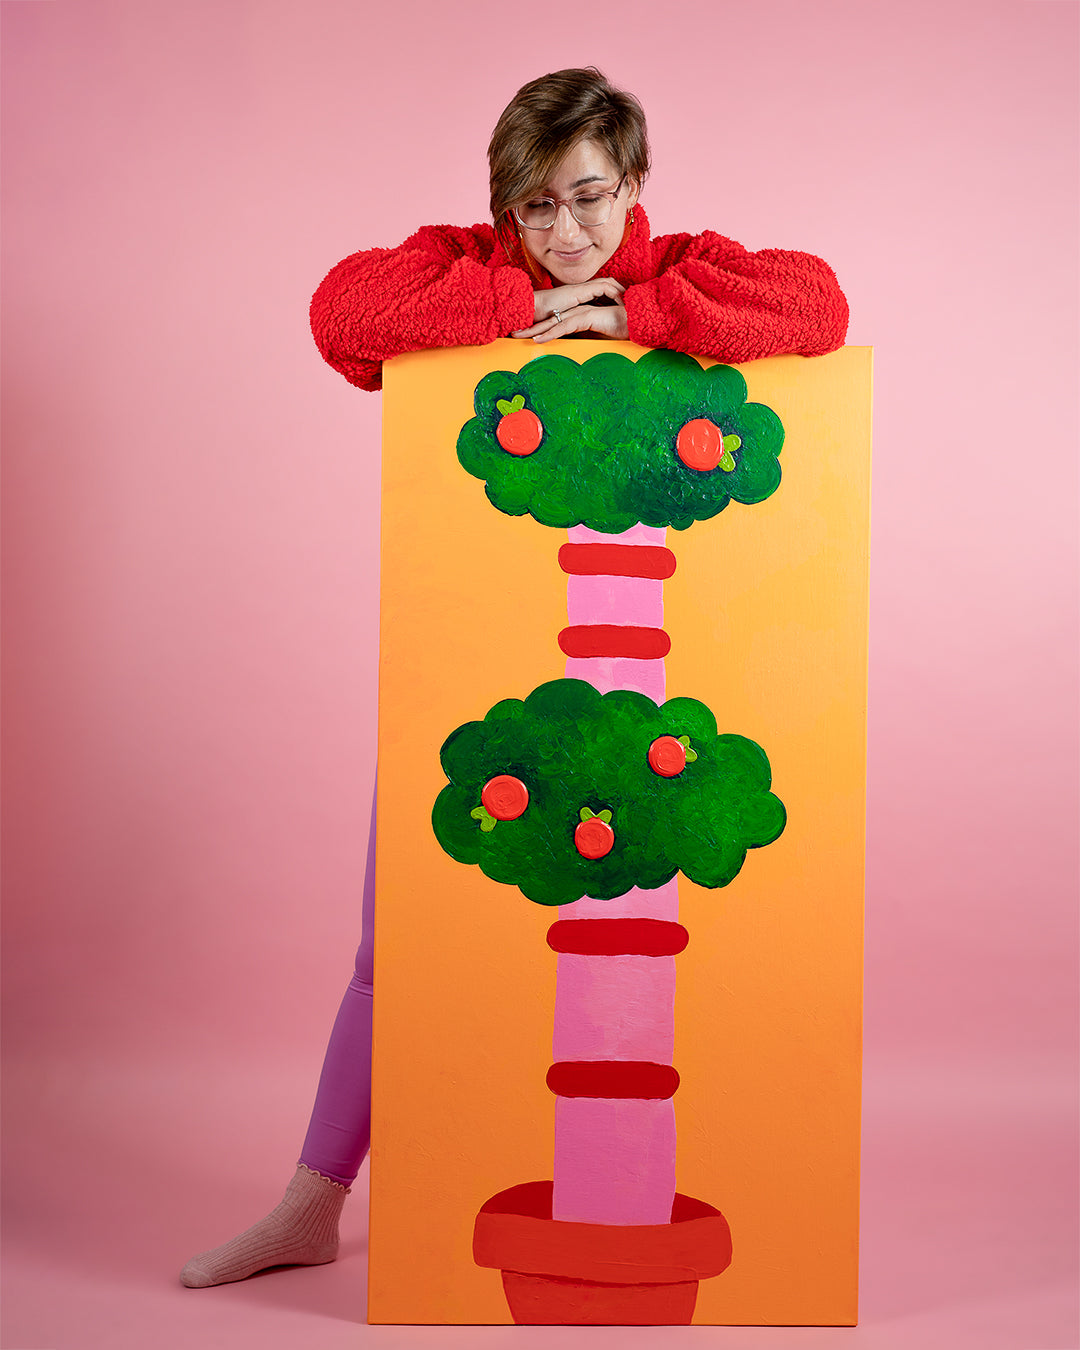 Photo of Cat Schmitz standing behind a four foot tall painting of a bushy tree with green leaves, oranges, and a pink and red striped tree trunk sitting in a red pot.